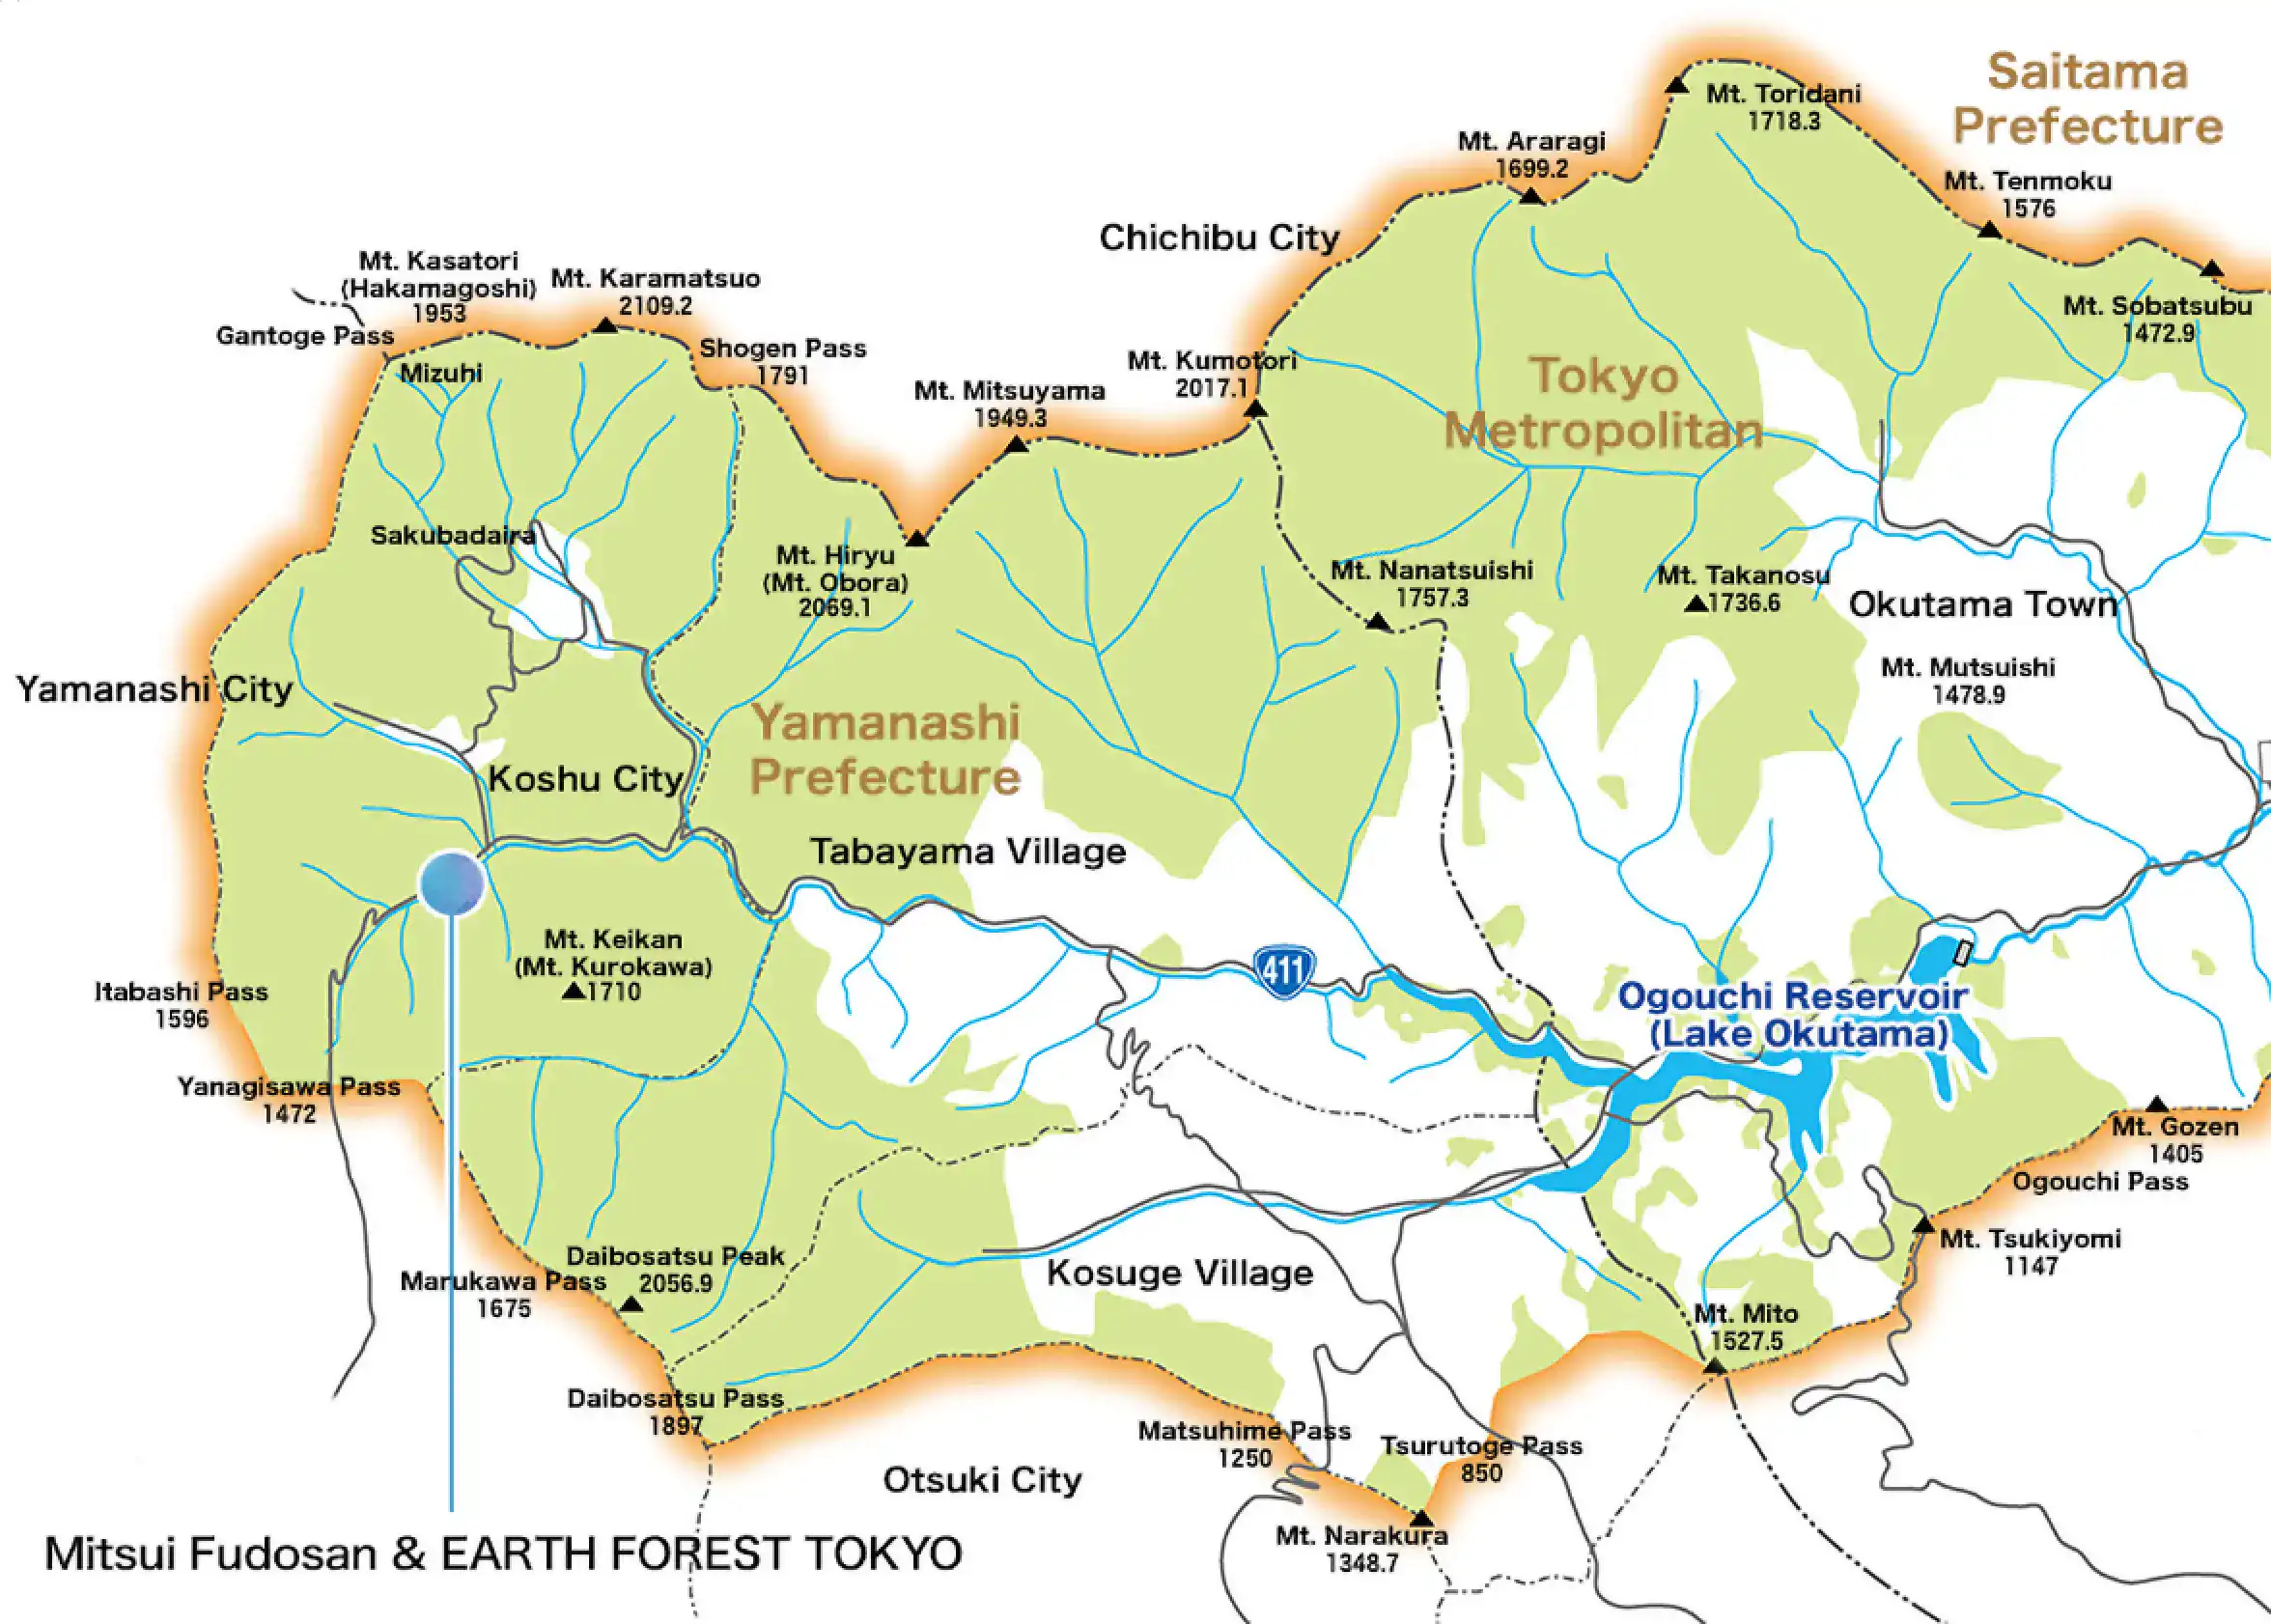 Agreement area Mitsui Fudosan & EARTH FOREST TOKYO